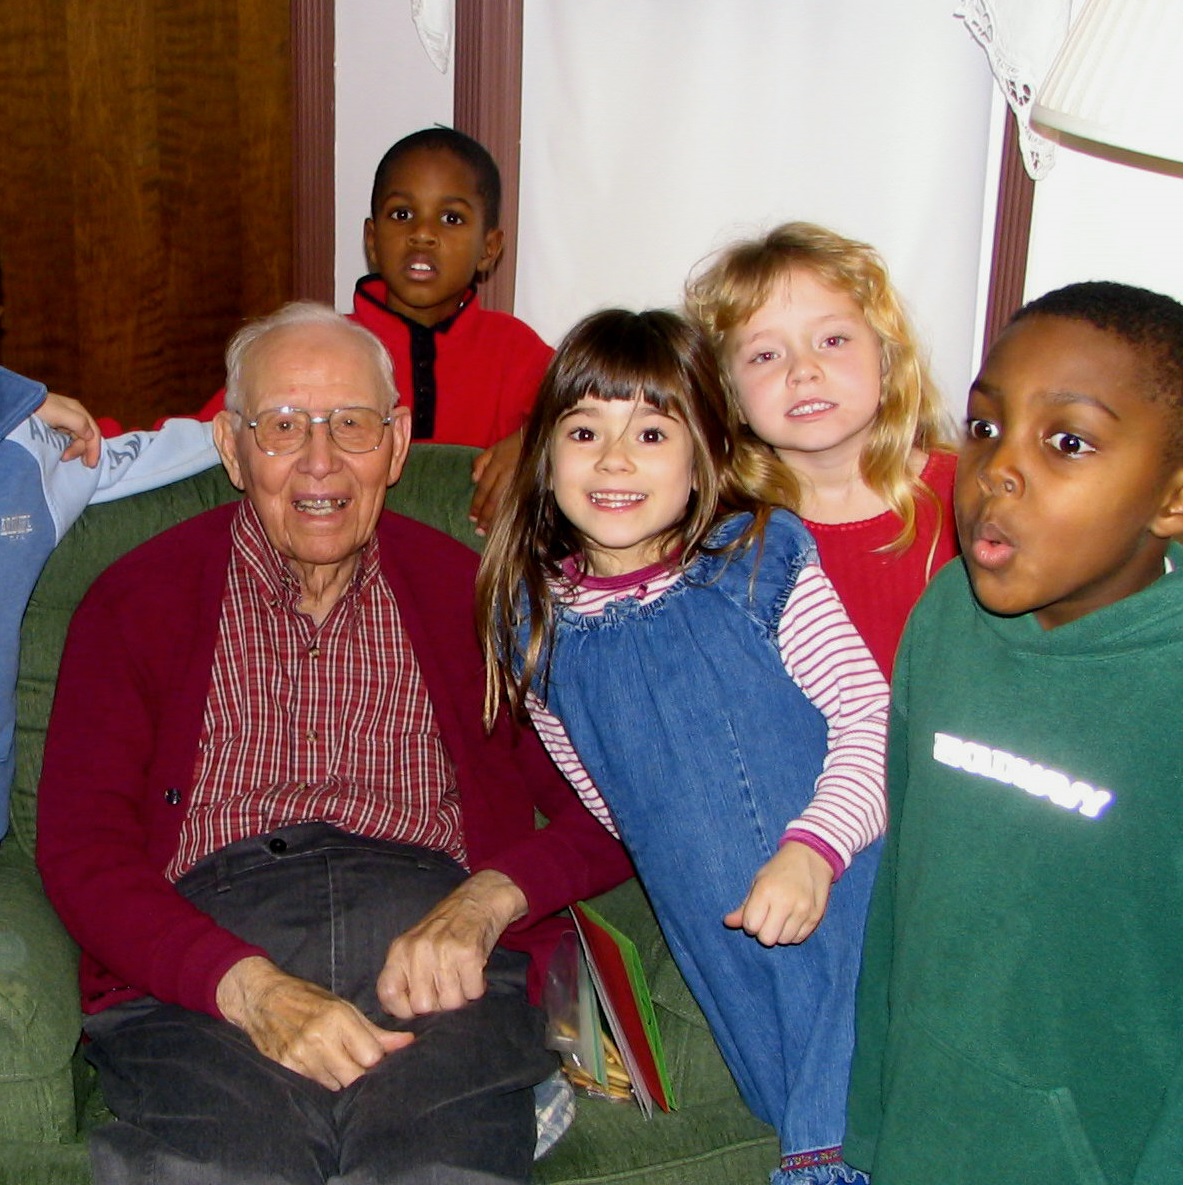 An elderly white man sits in a cozy green chair, smiling, surrounded by children around seven years old, two white girls and two black boys part of a larger group of kids.